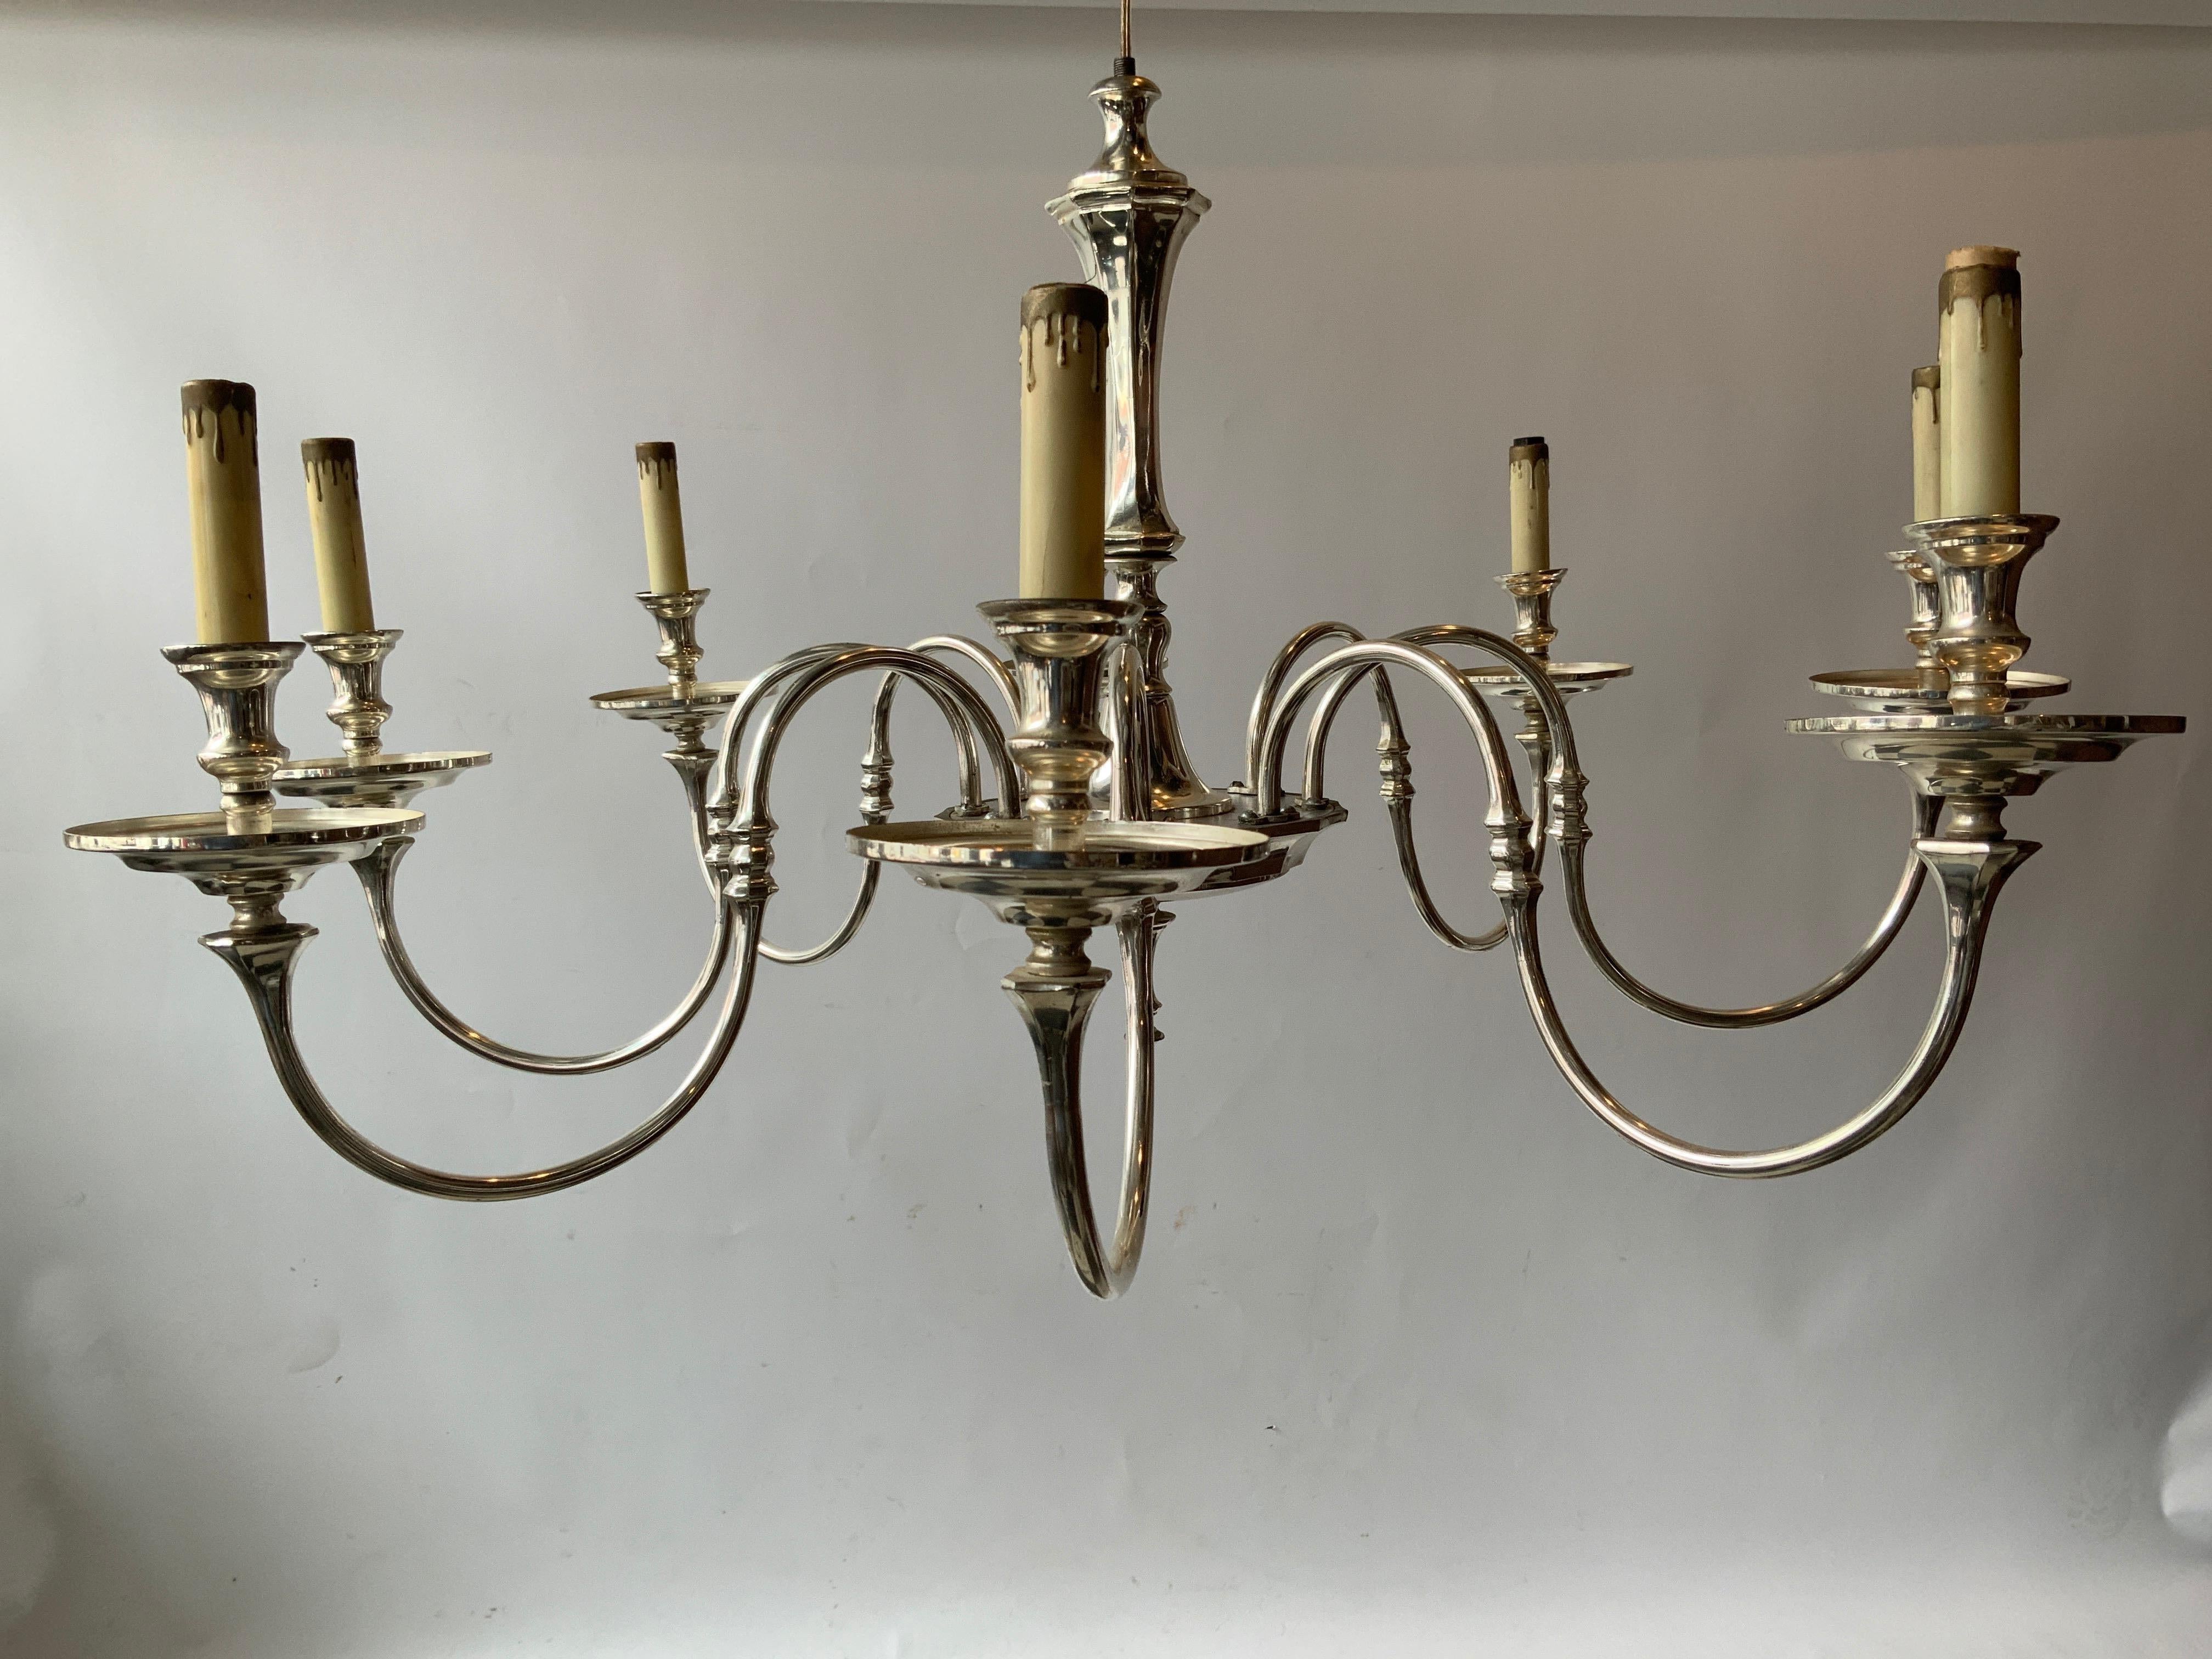 1960s silver plate 8-arm chandelier made in Spain.